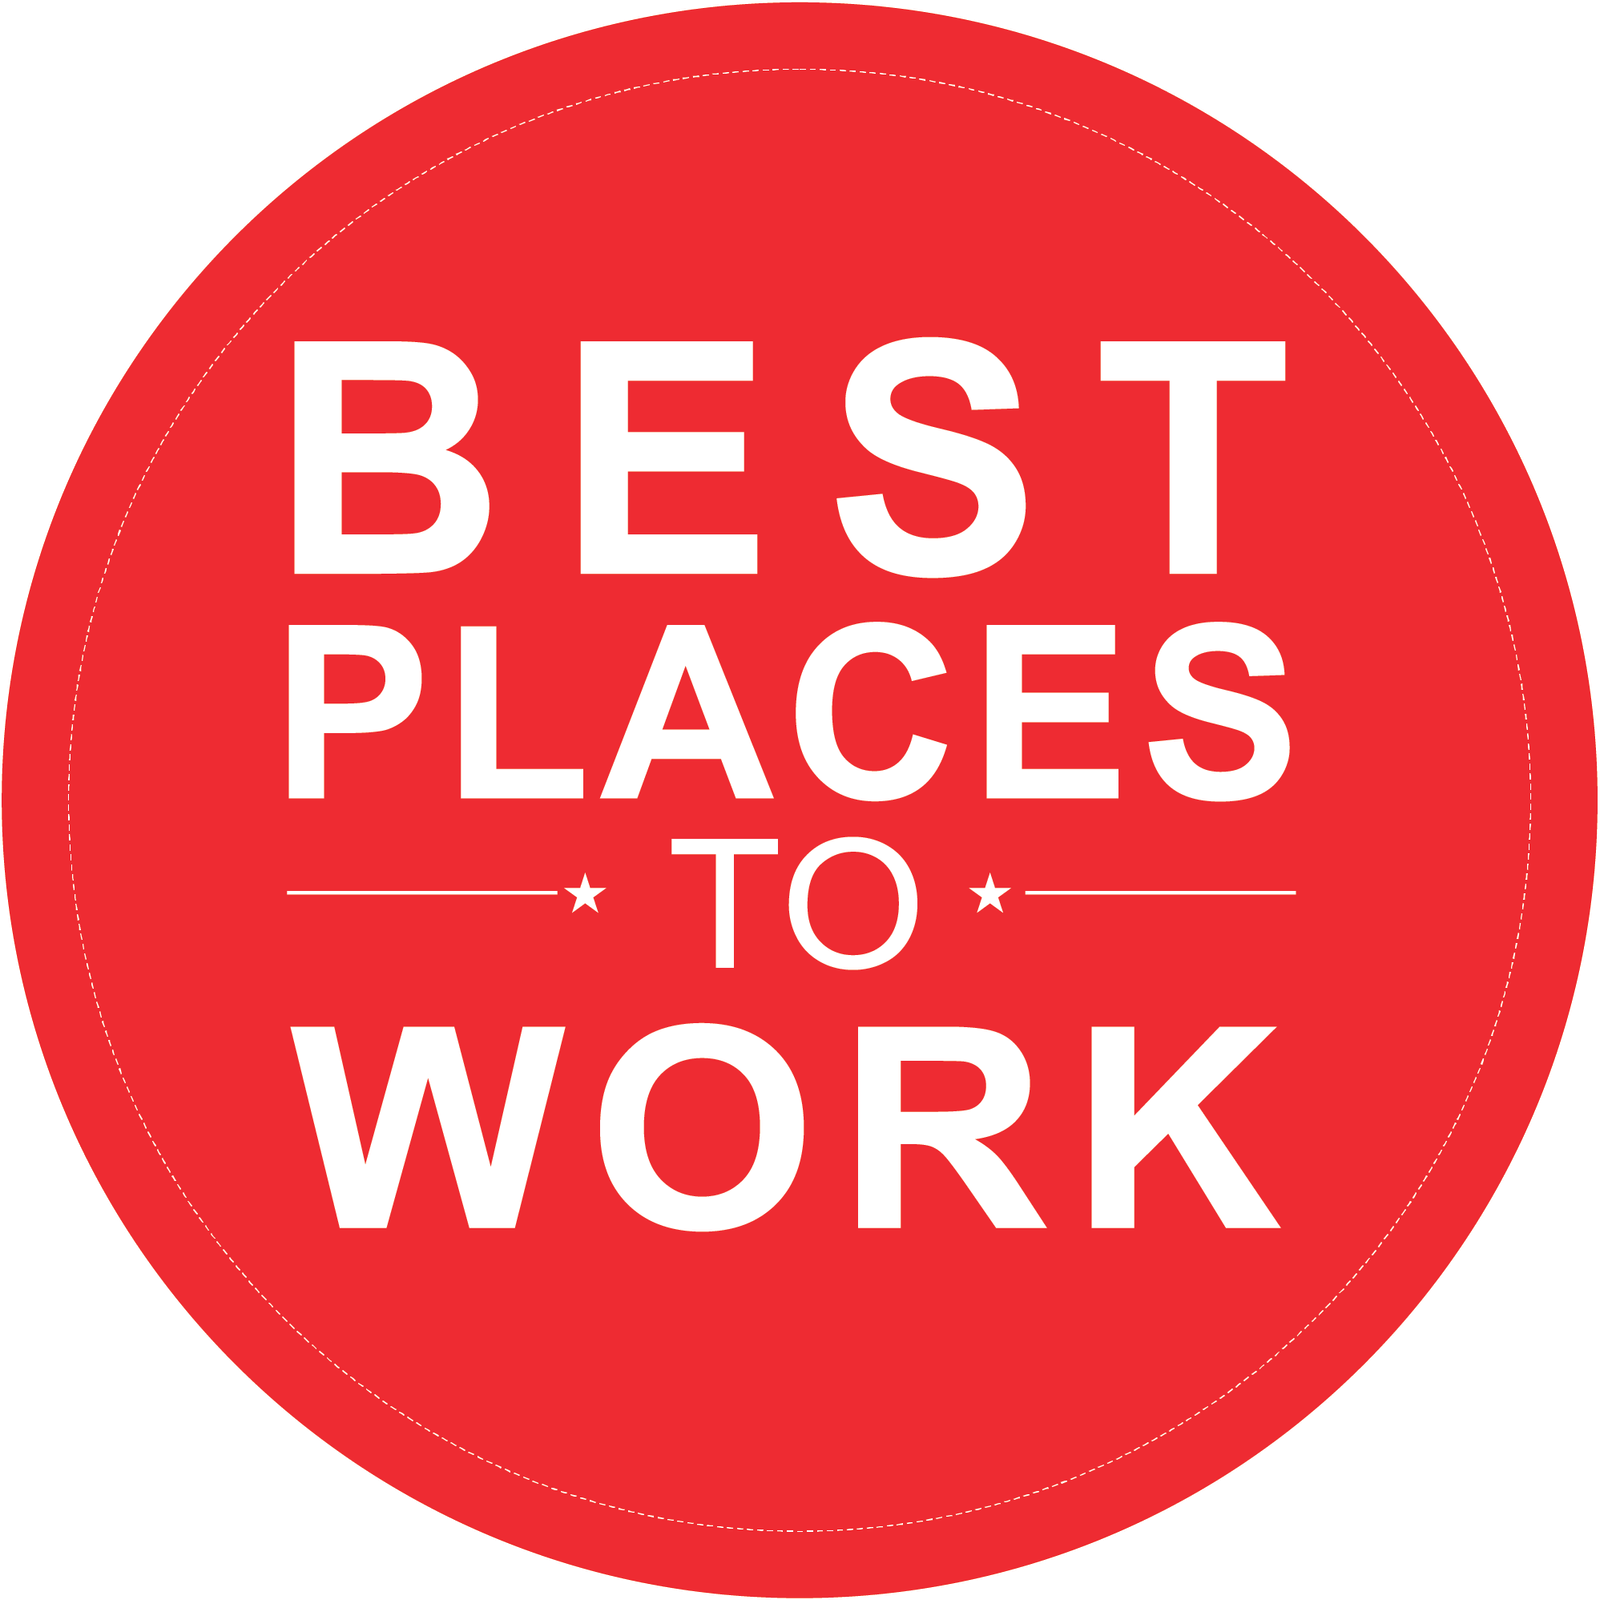 Best Place to Work, onshore, offshore, BPO, IT, design